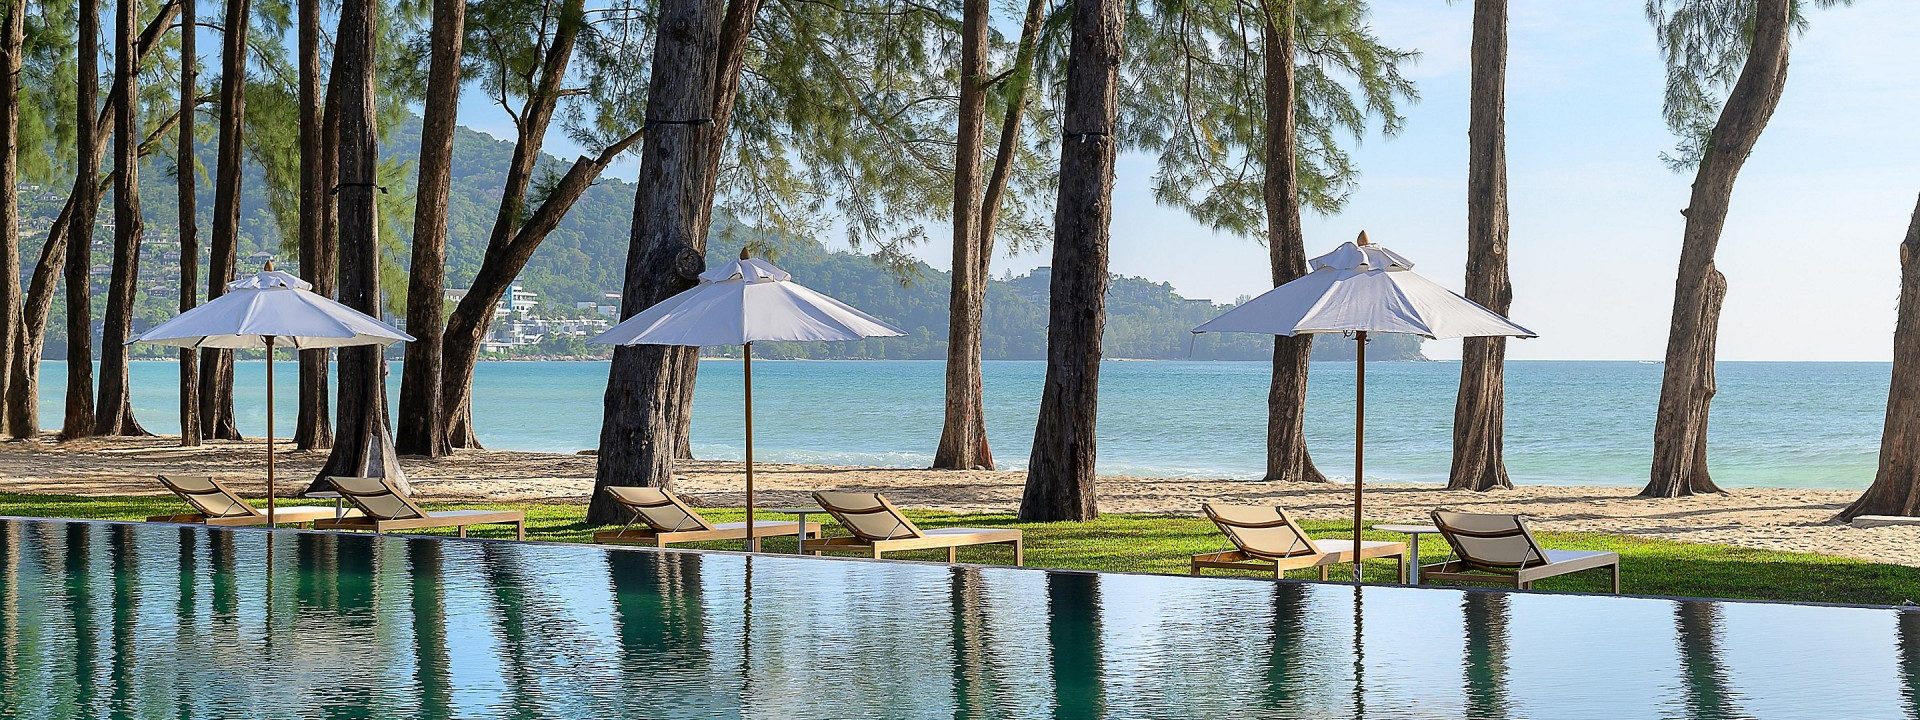 Fit to Thai: Intercontinental Phuket will wow you throughout your entire stay